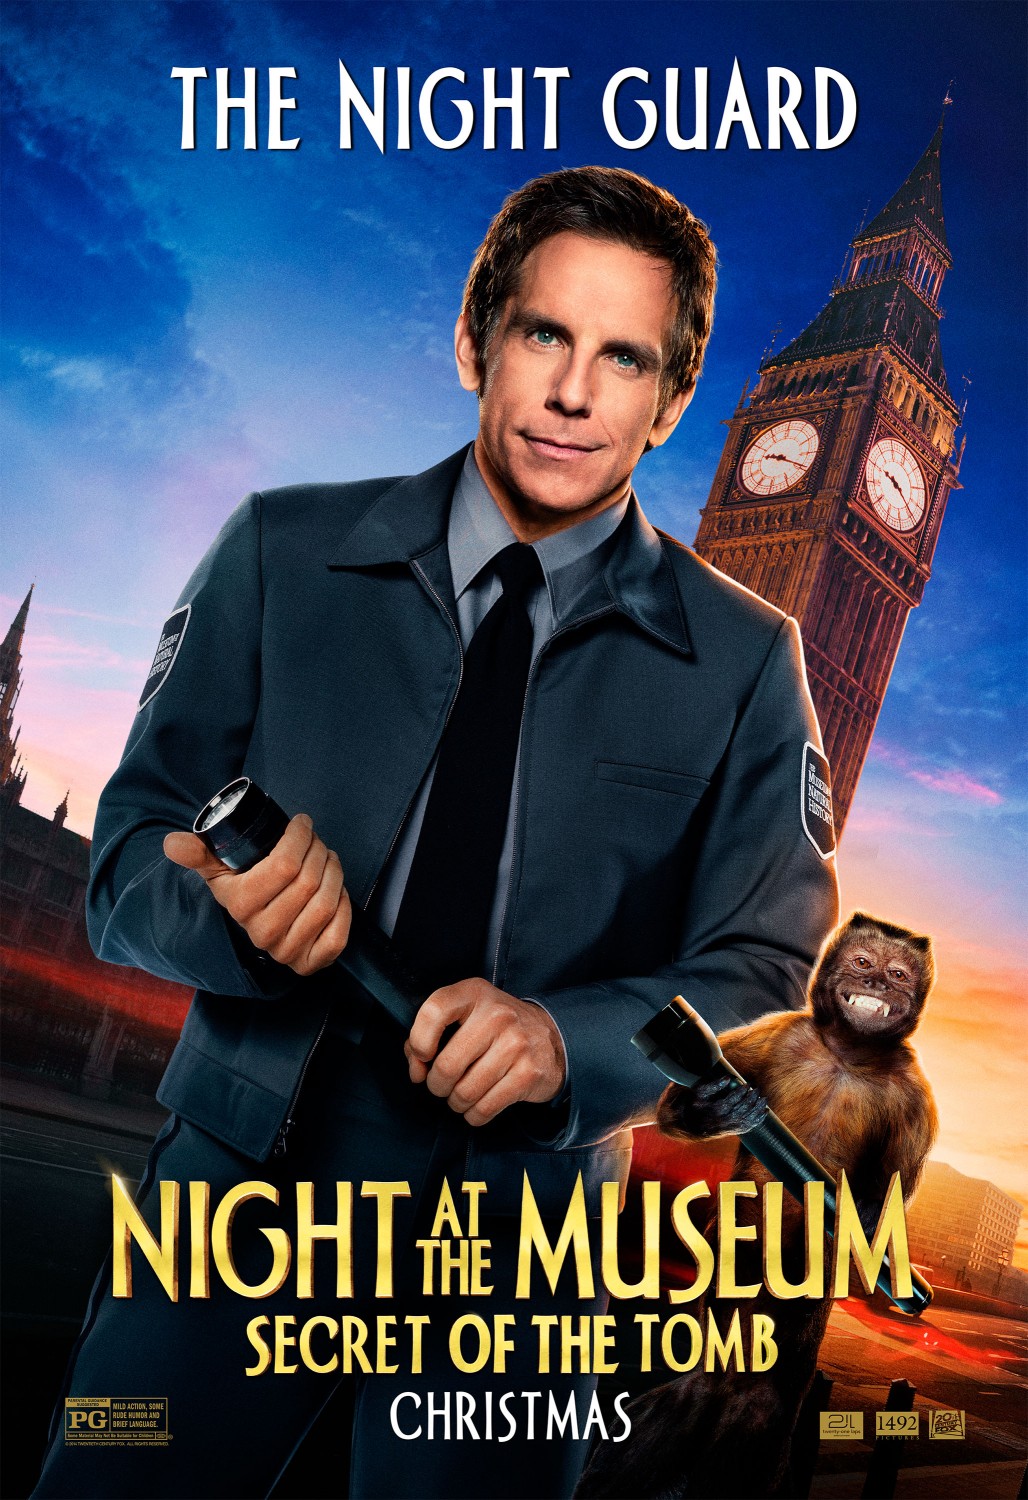 Night at the Museum: Secret of the Tomb Art